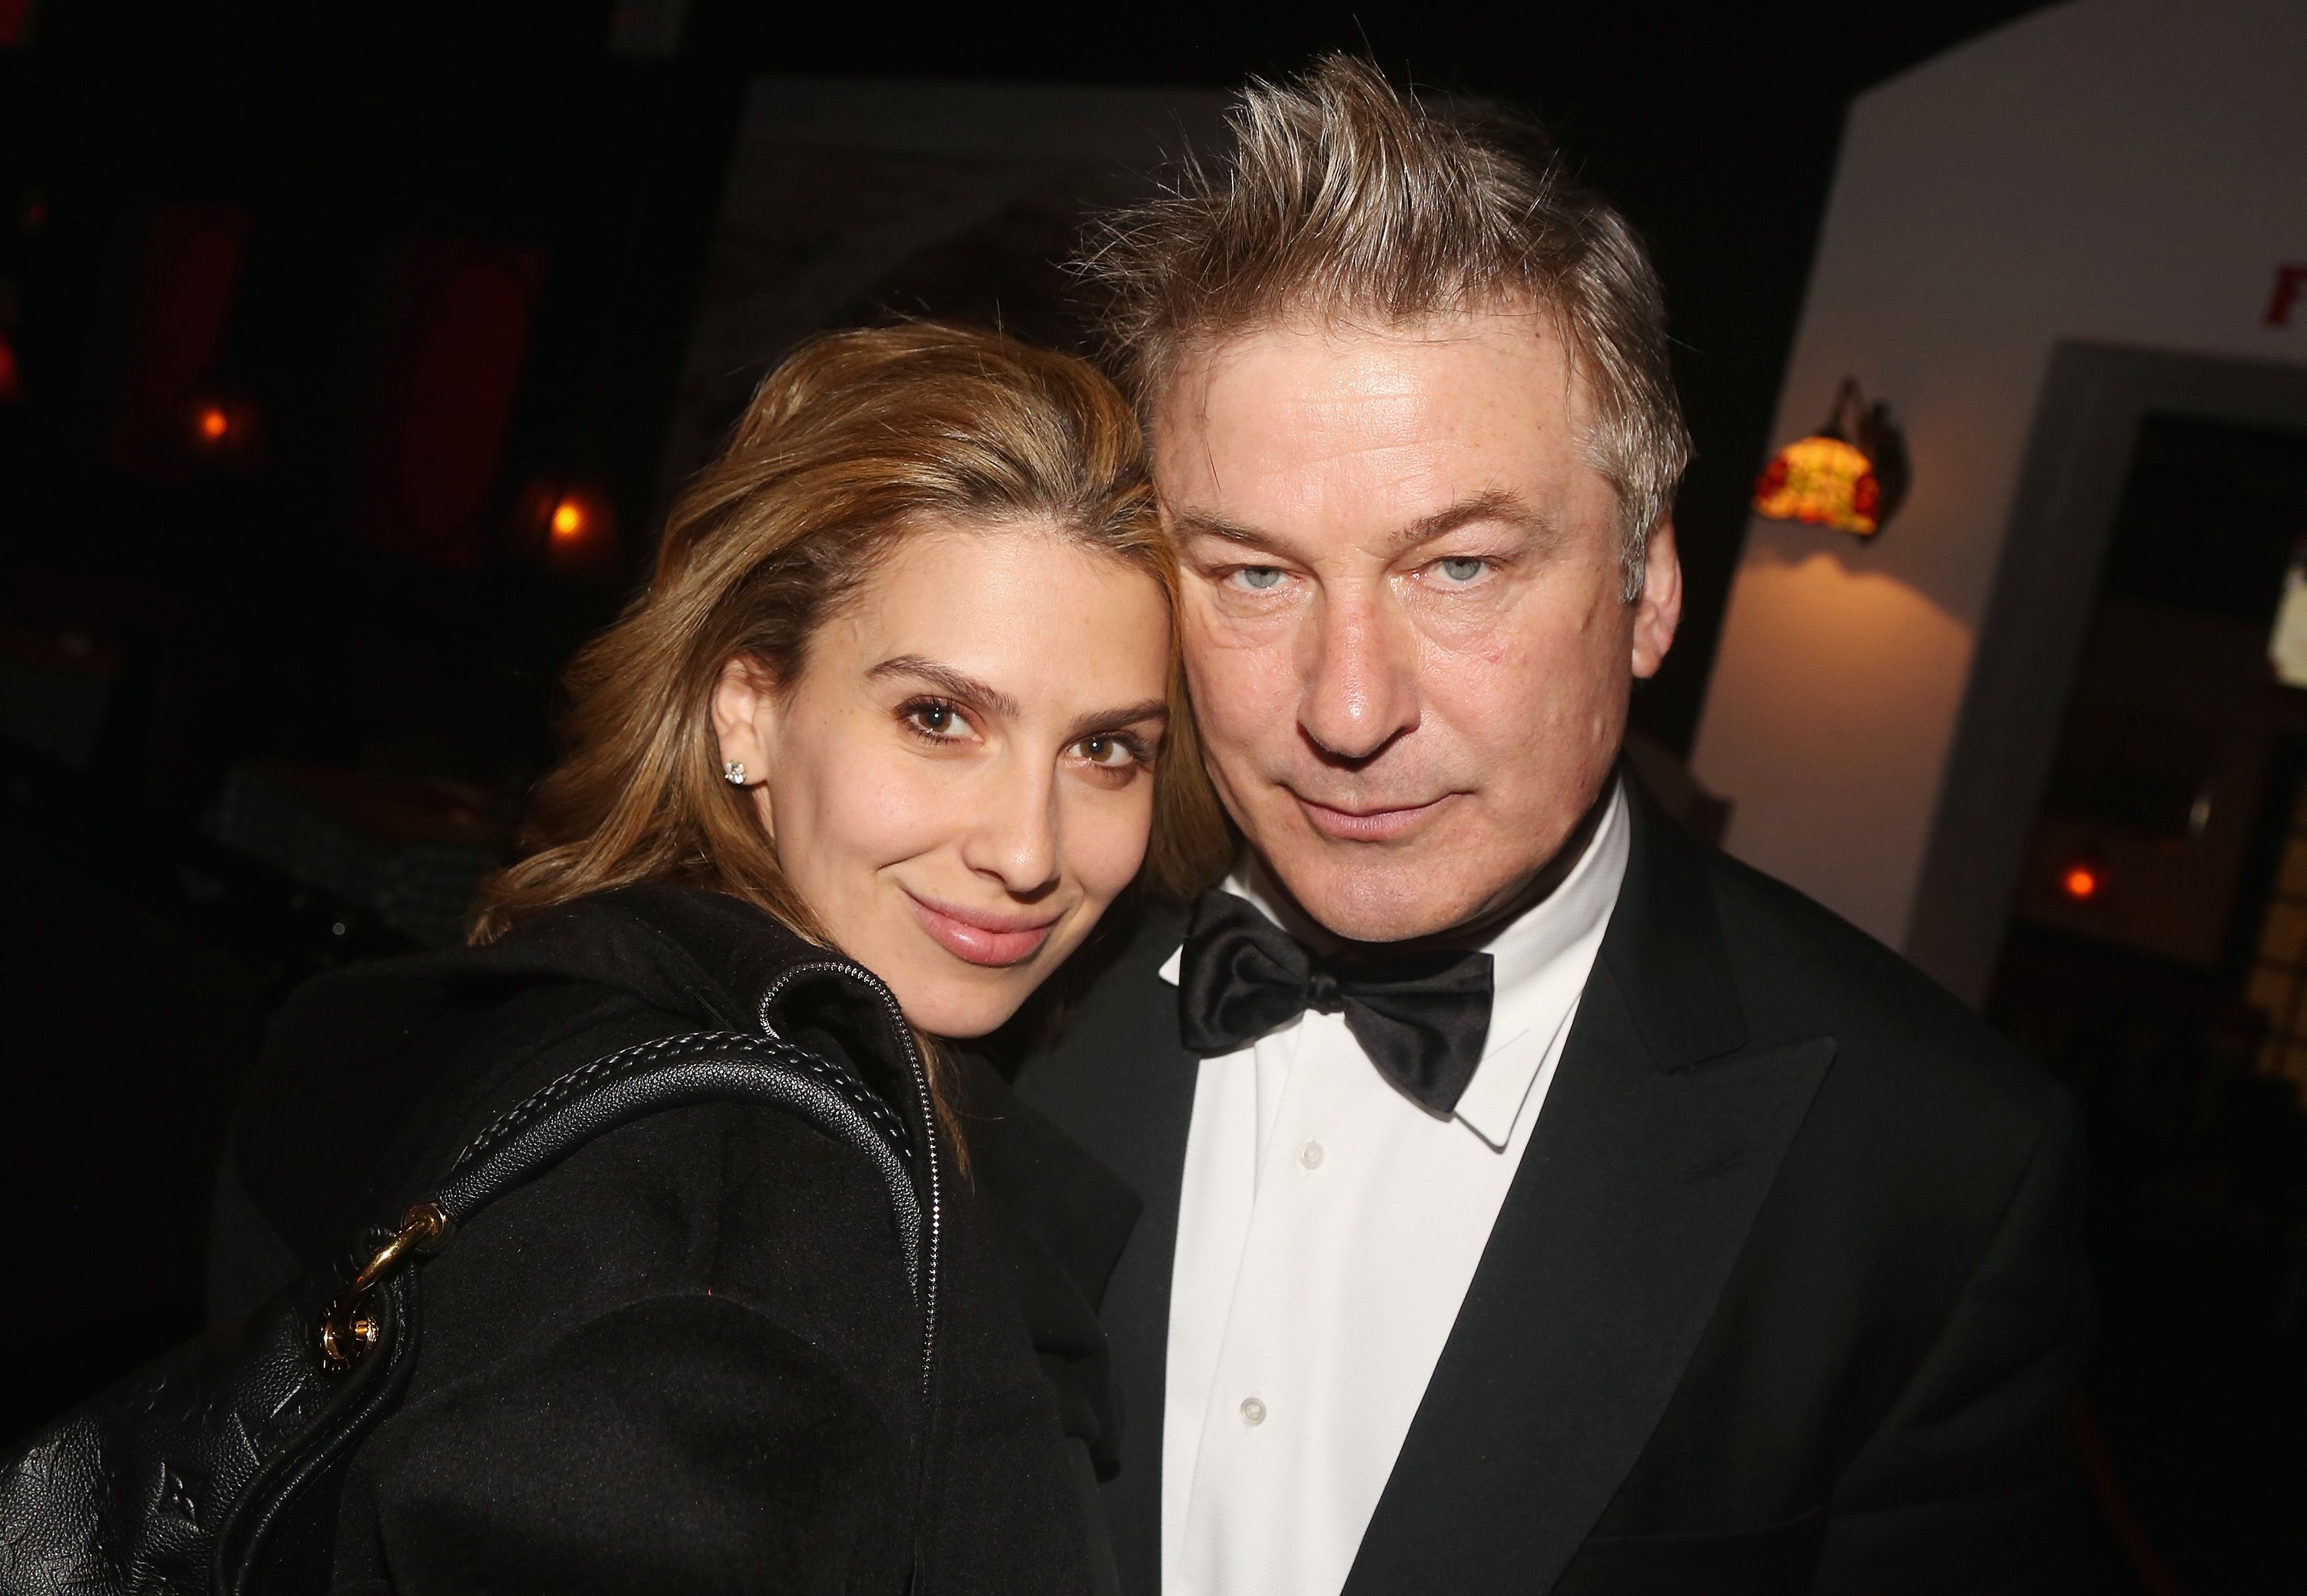 Hilaria Baldwin and Alec Baldwin at the after-party for The Roundabout Theatre Company in April 2019 in New York City | Source: Getty Images